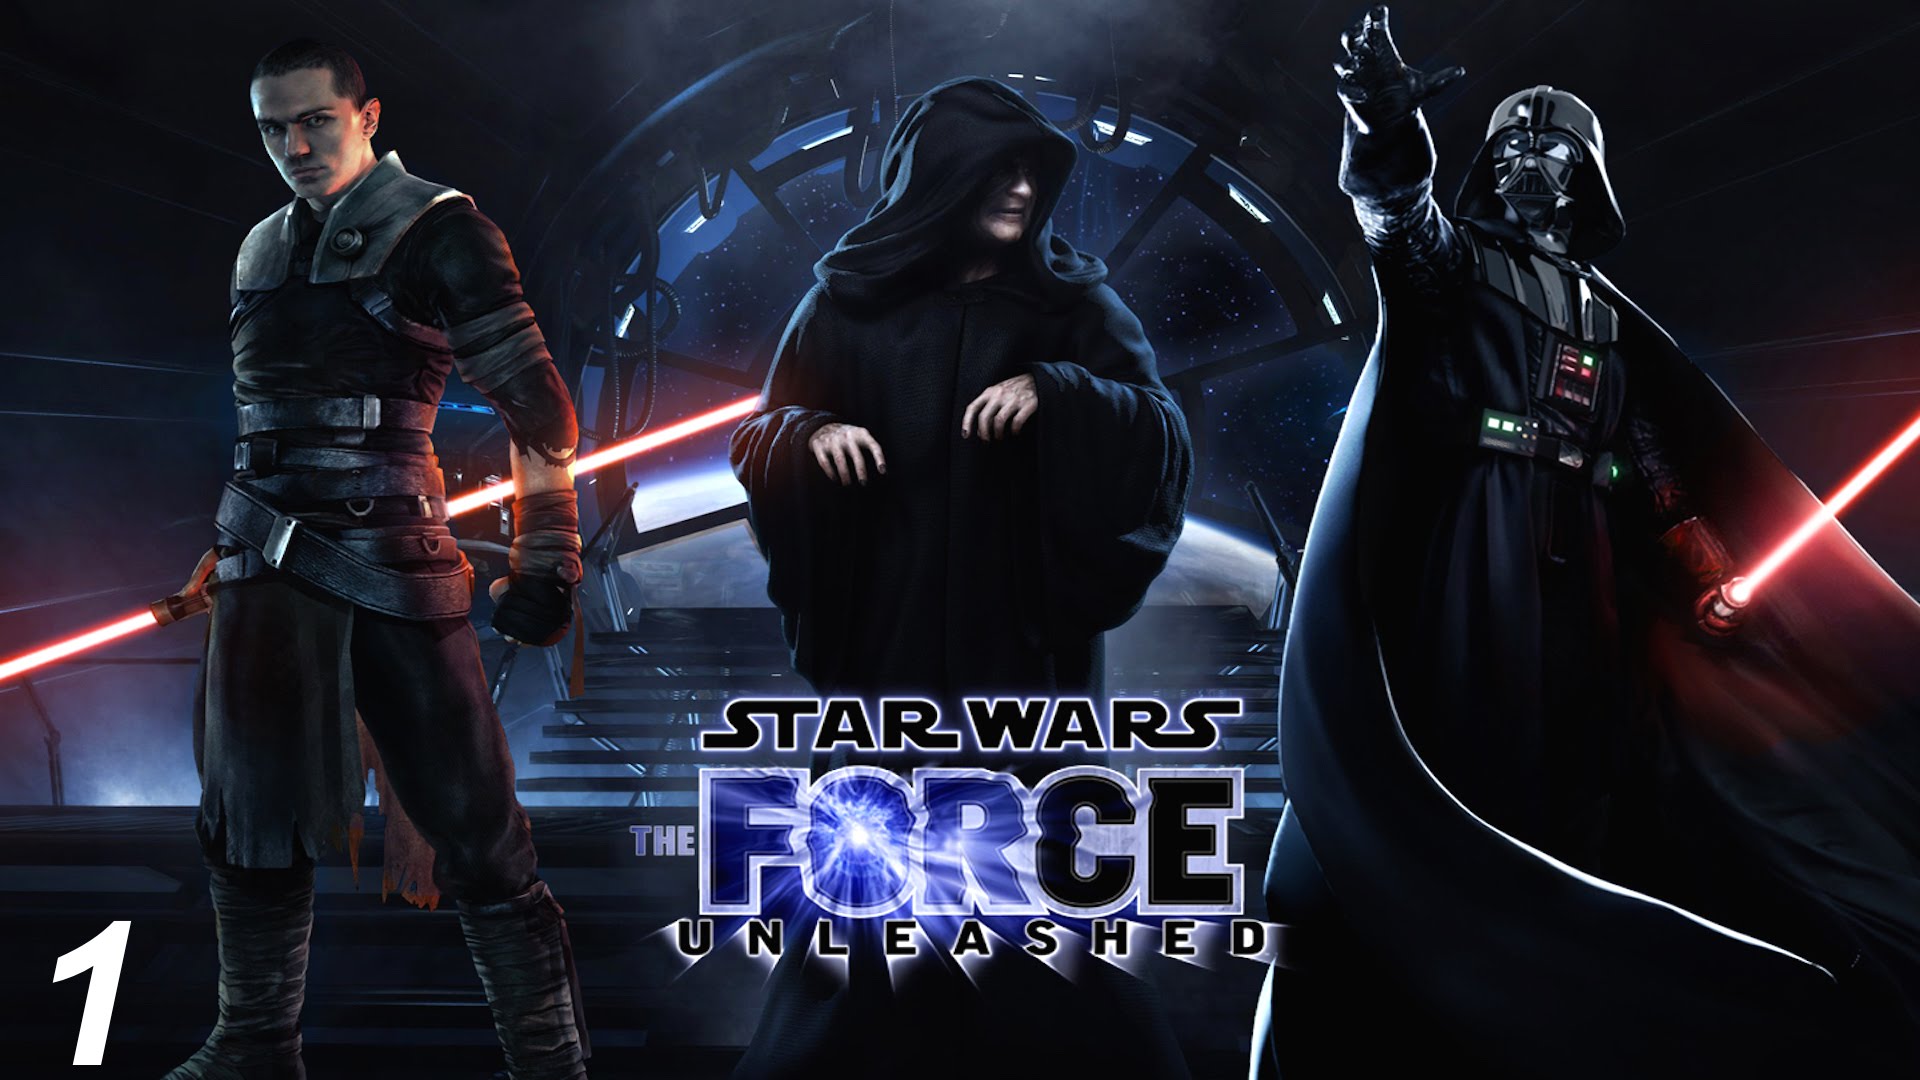 STAR WARS- THE FORCE UNLEASHED